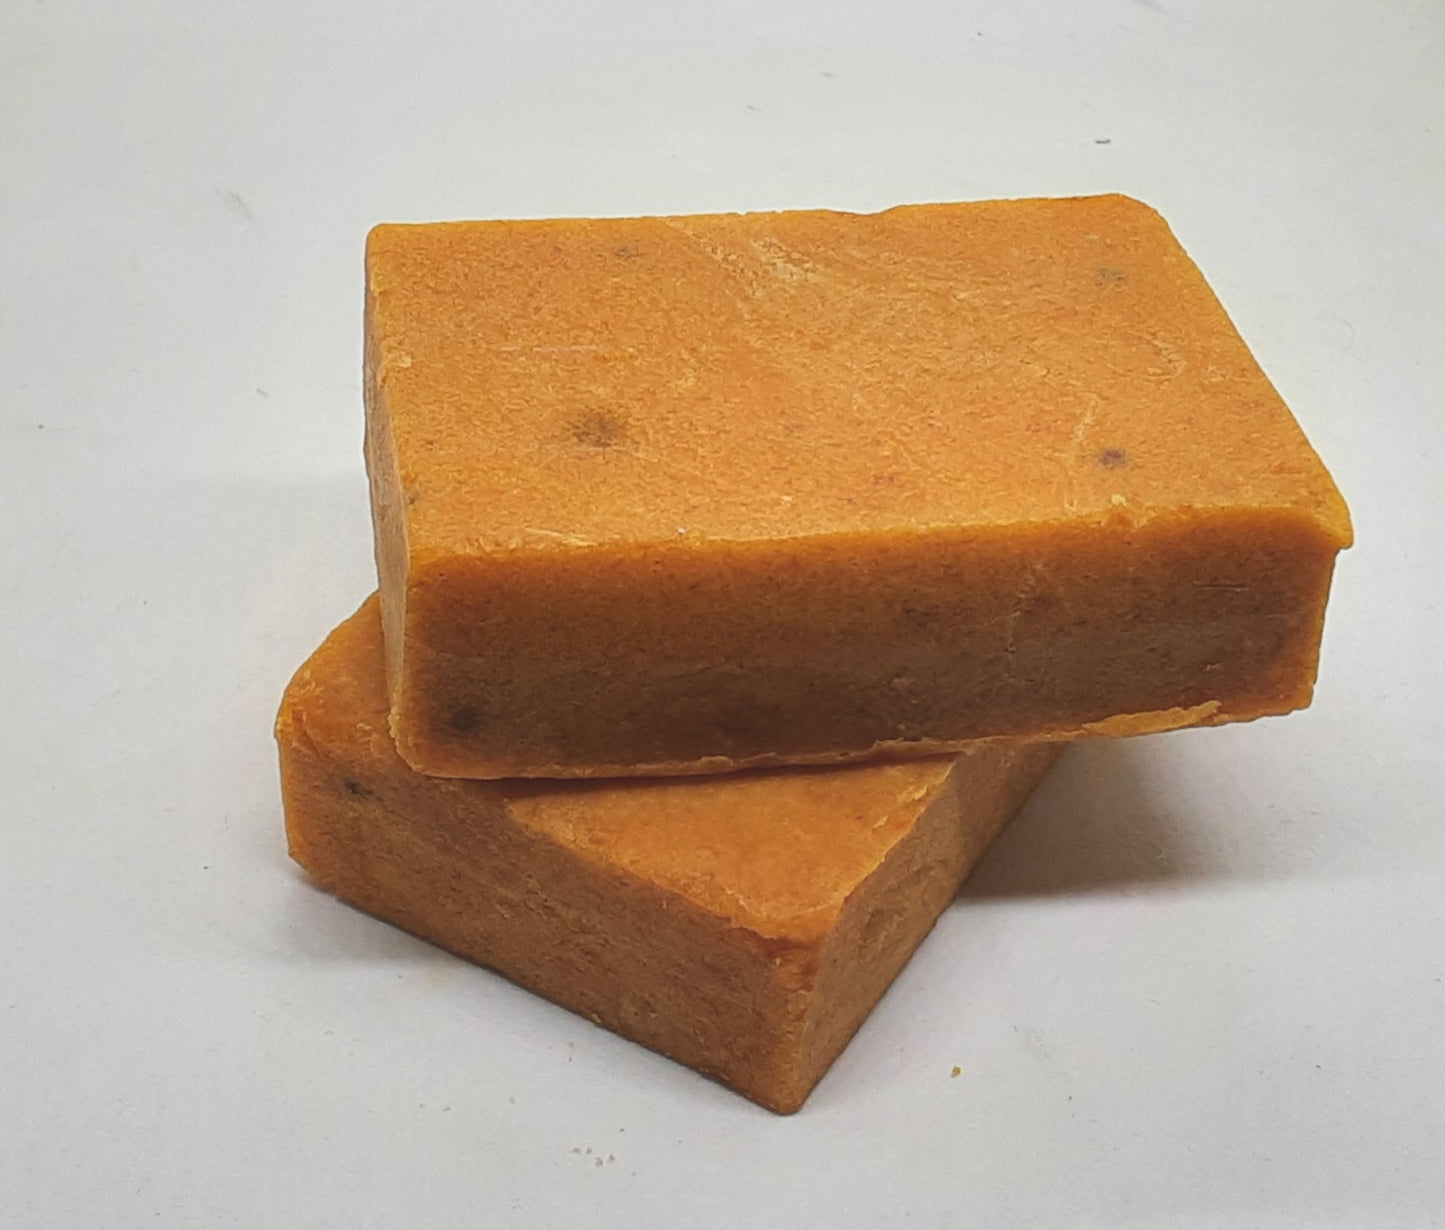 Hand Milled Market Fresh Organic Tomato Soap, Great for Problem Skin, Exfoliating